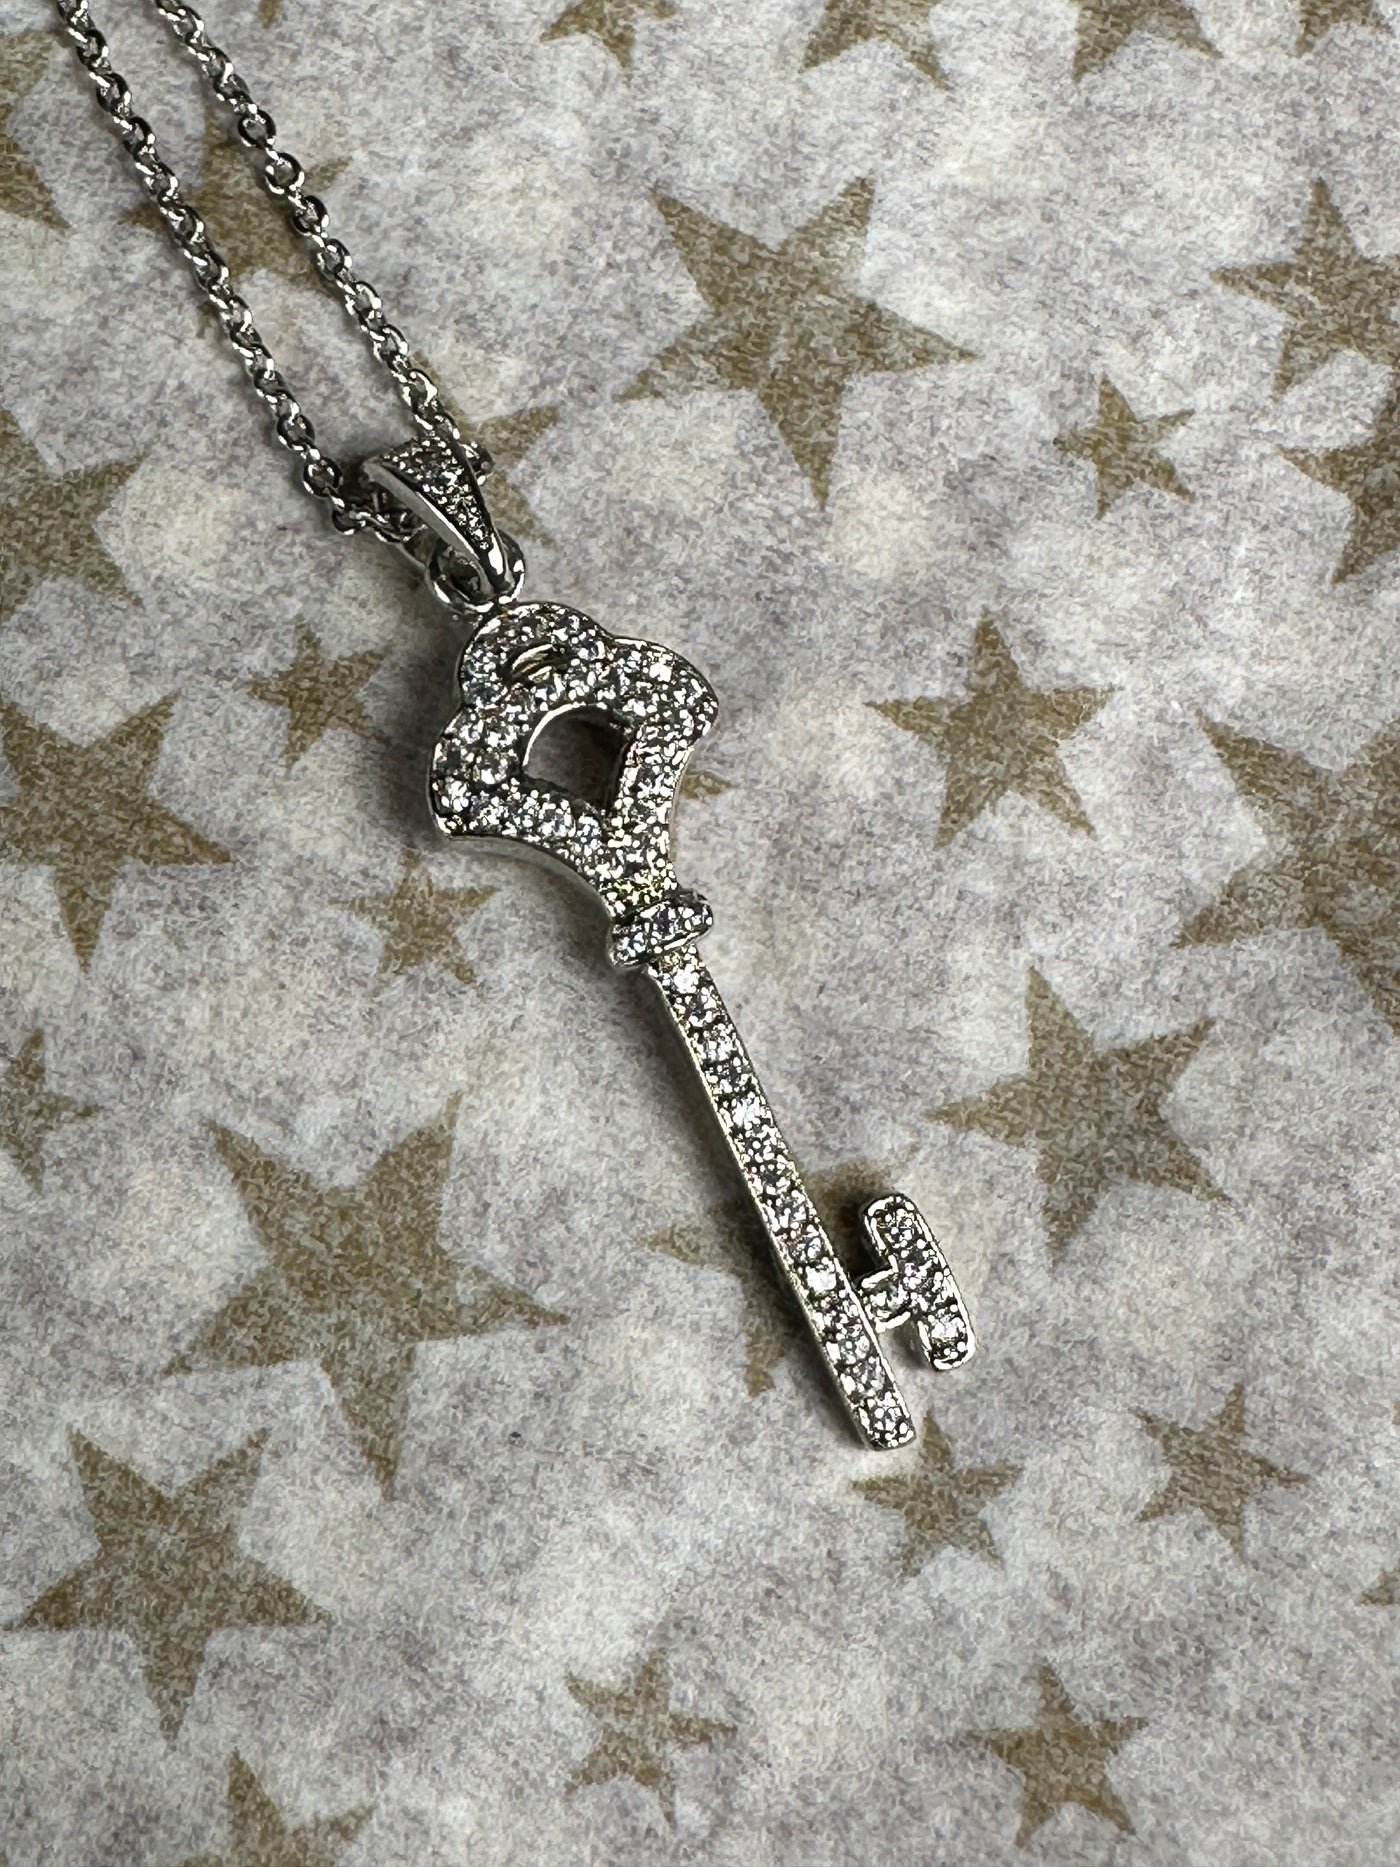 Pave Set Cubic Zirconia Dainty Key Pendant Necklace in Silver Tone